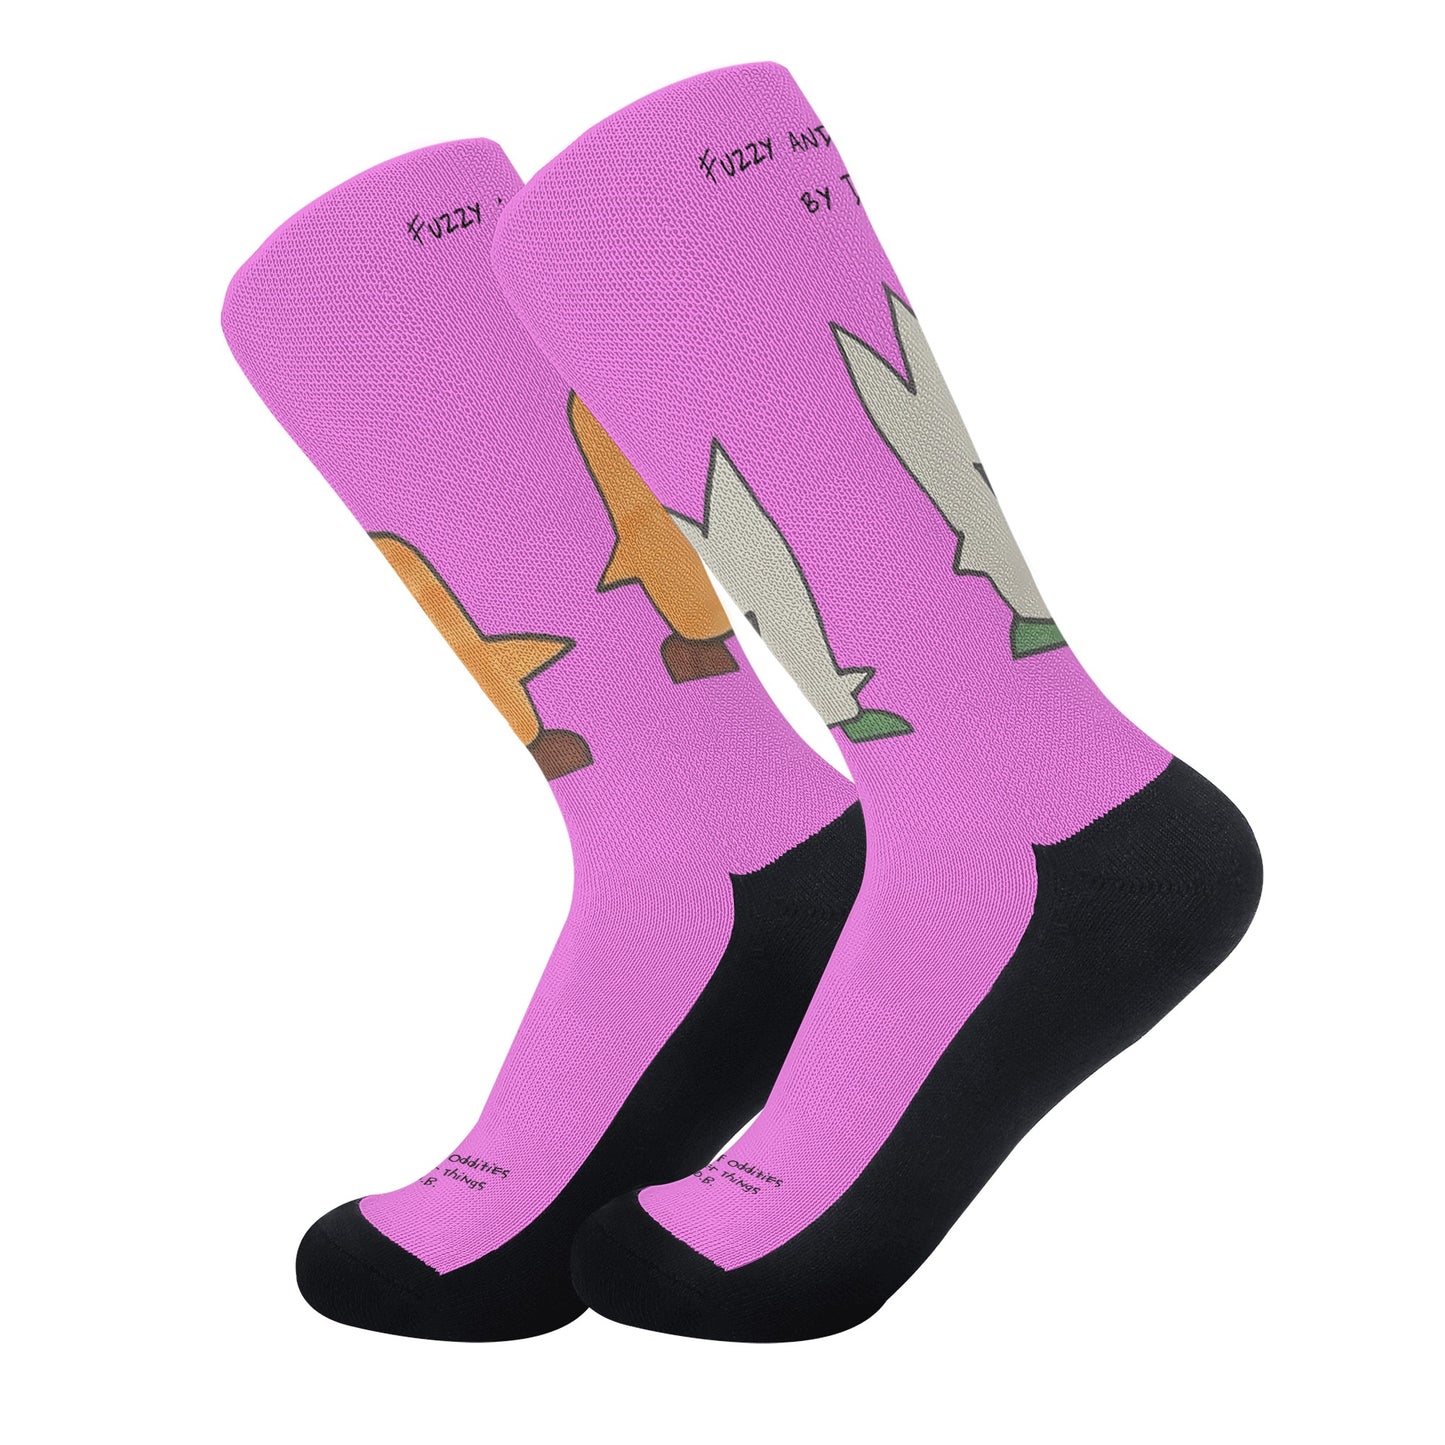 Fuzzy and Muffin by D.B. Wearable Art Comfy Funky Socks Sensory Friendly Seamless Toe (Pink)